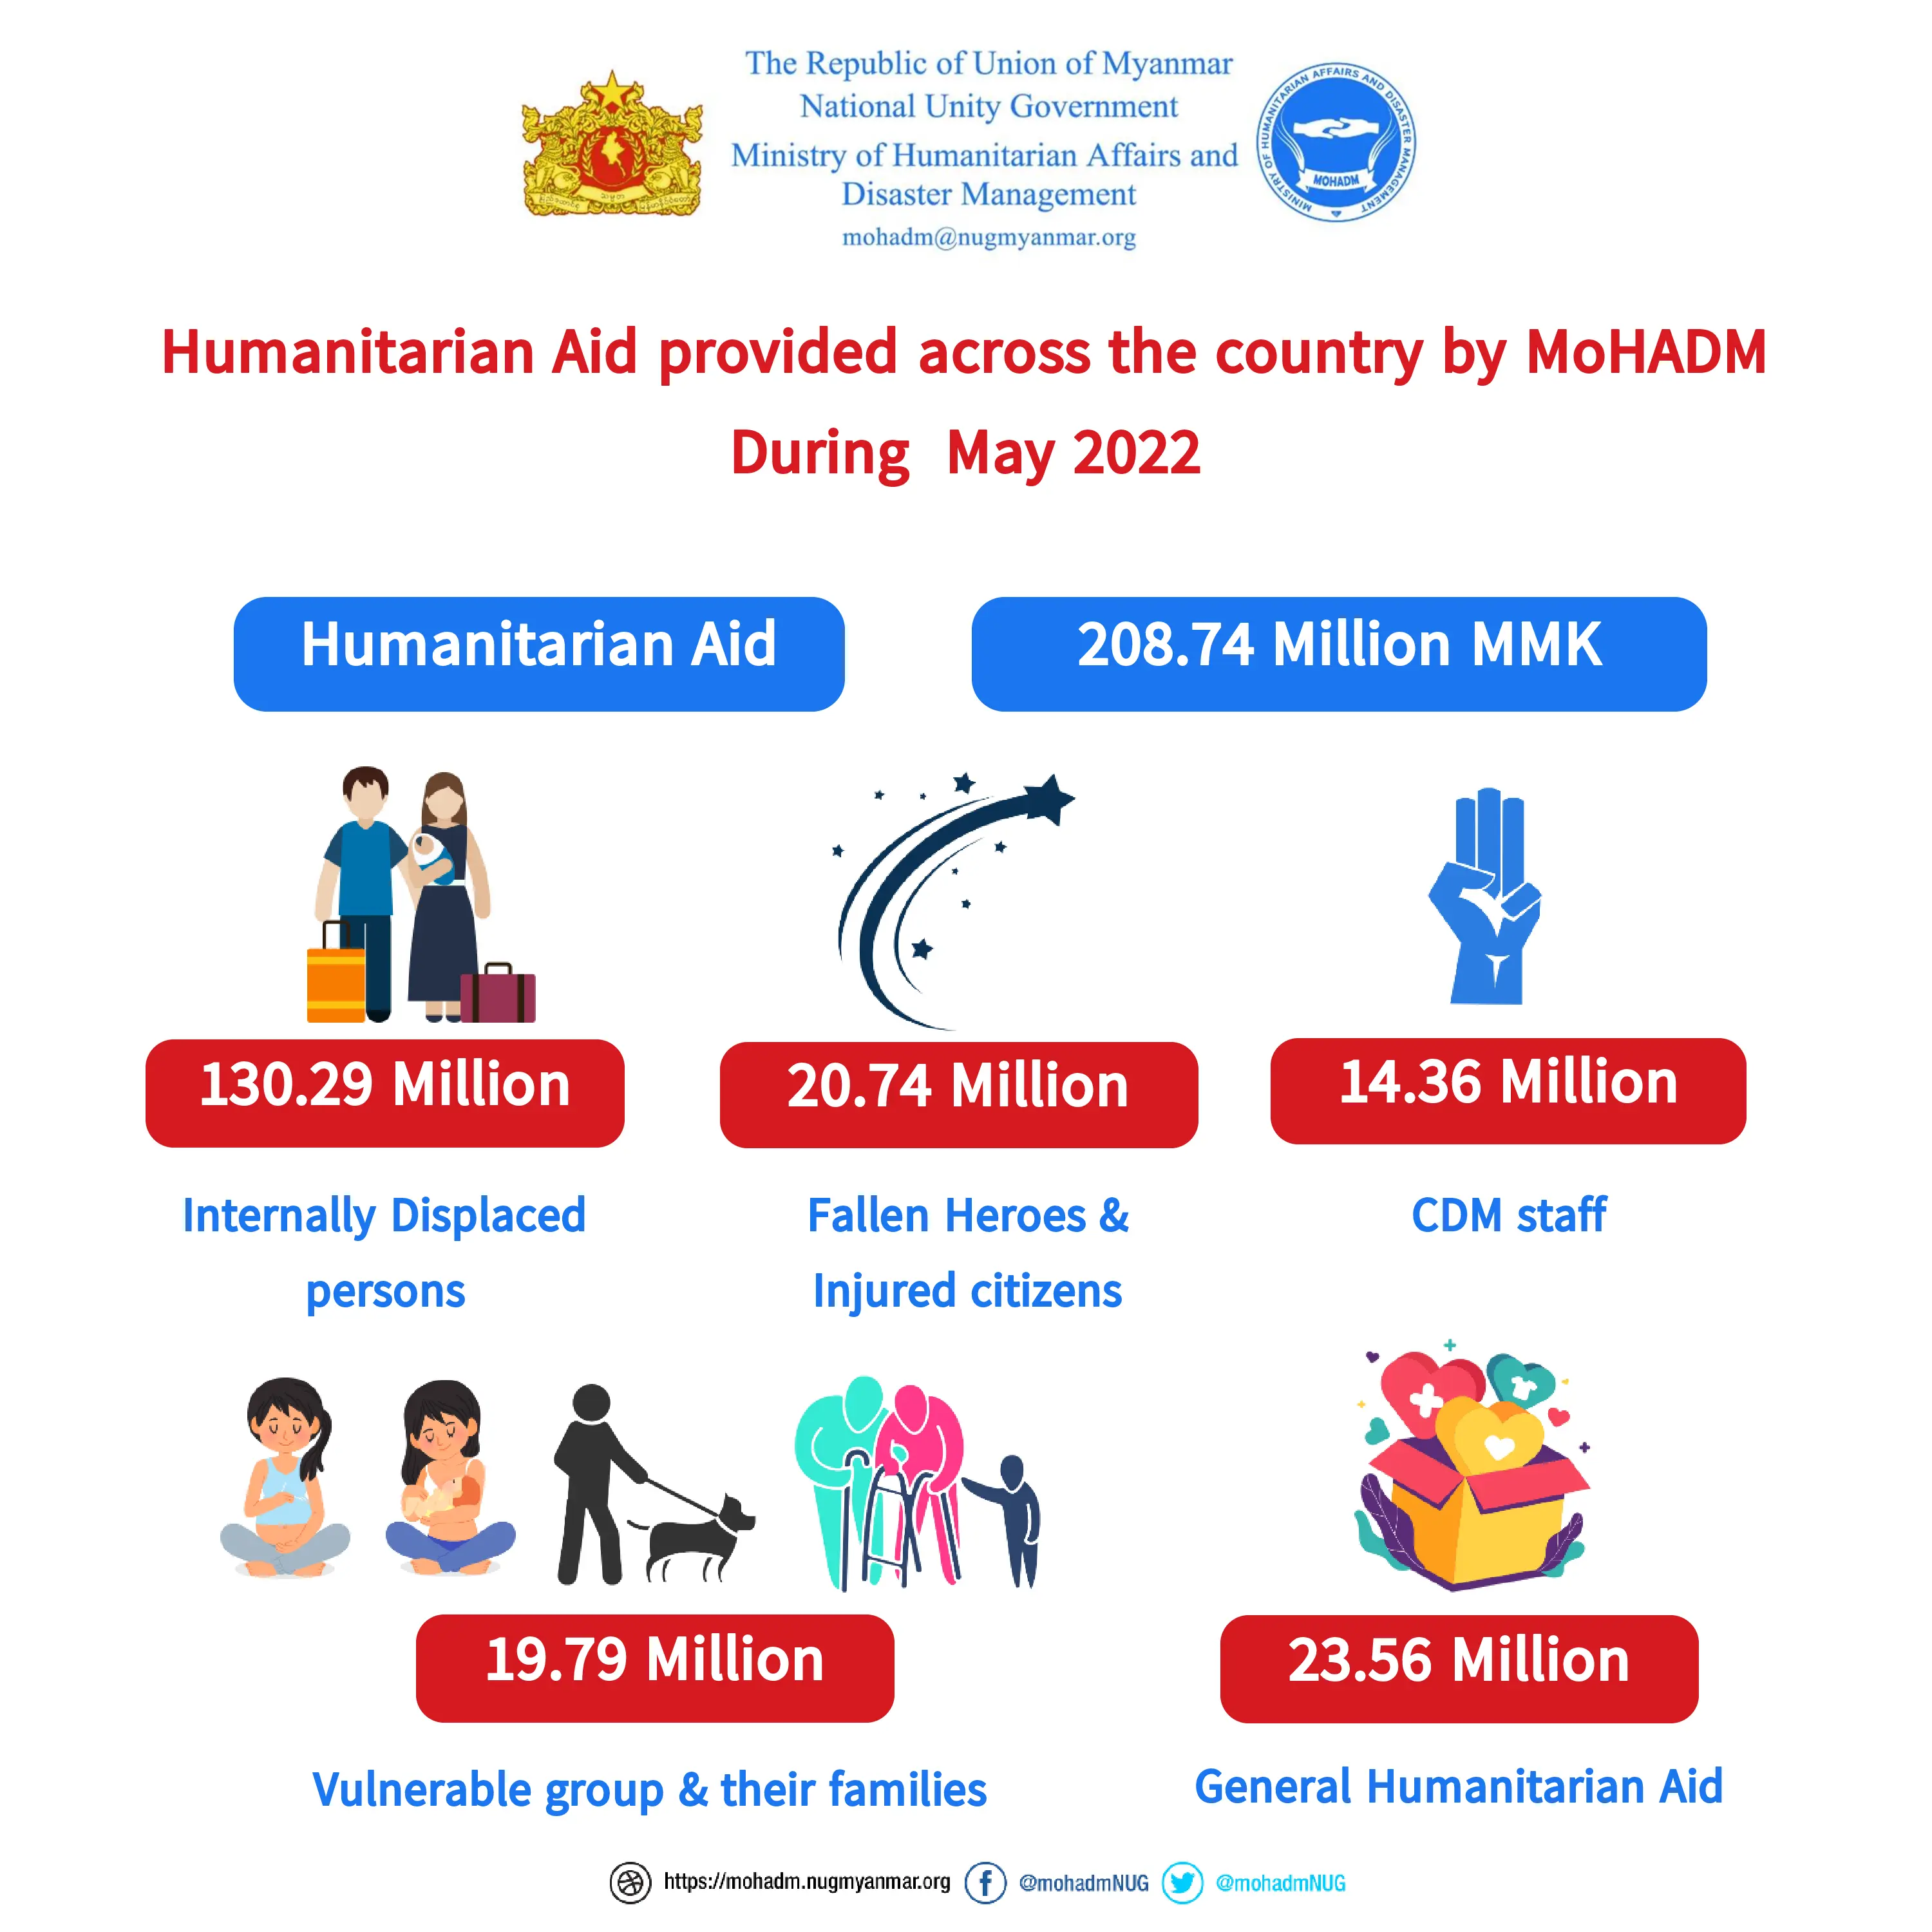 Summary of humanitarian aid provision by MoHADM (May 2022)